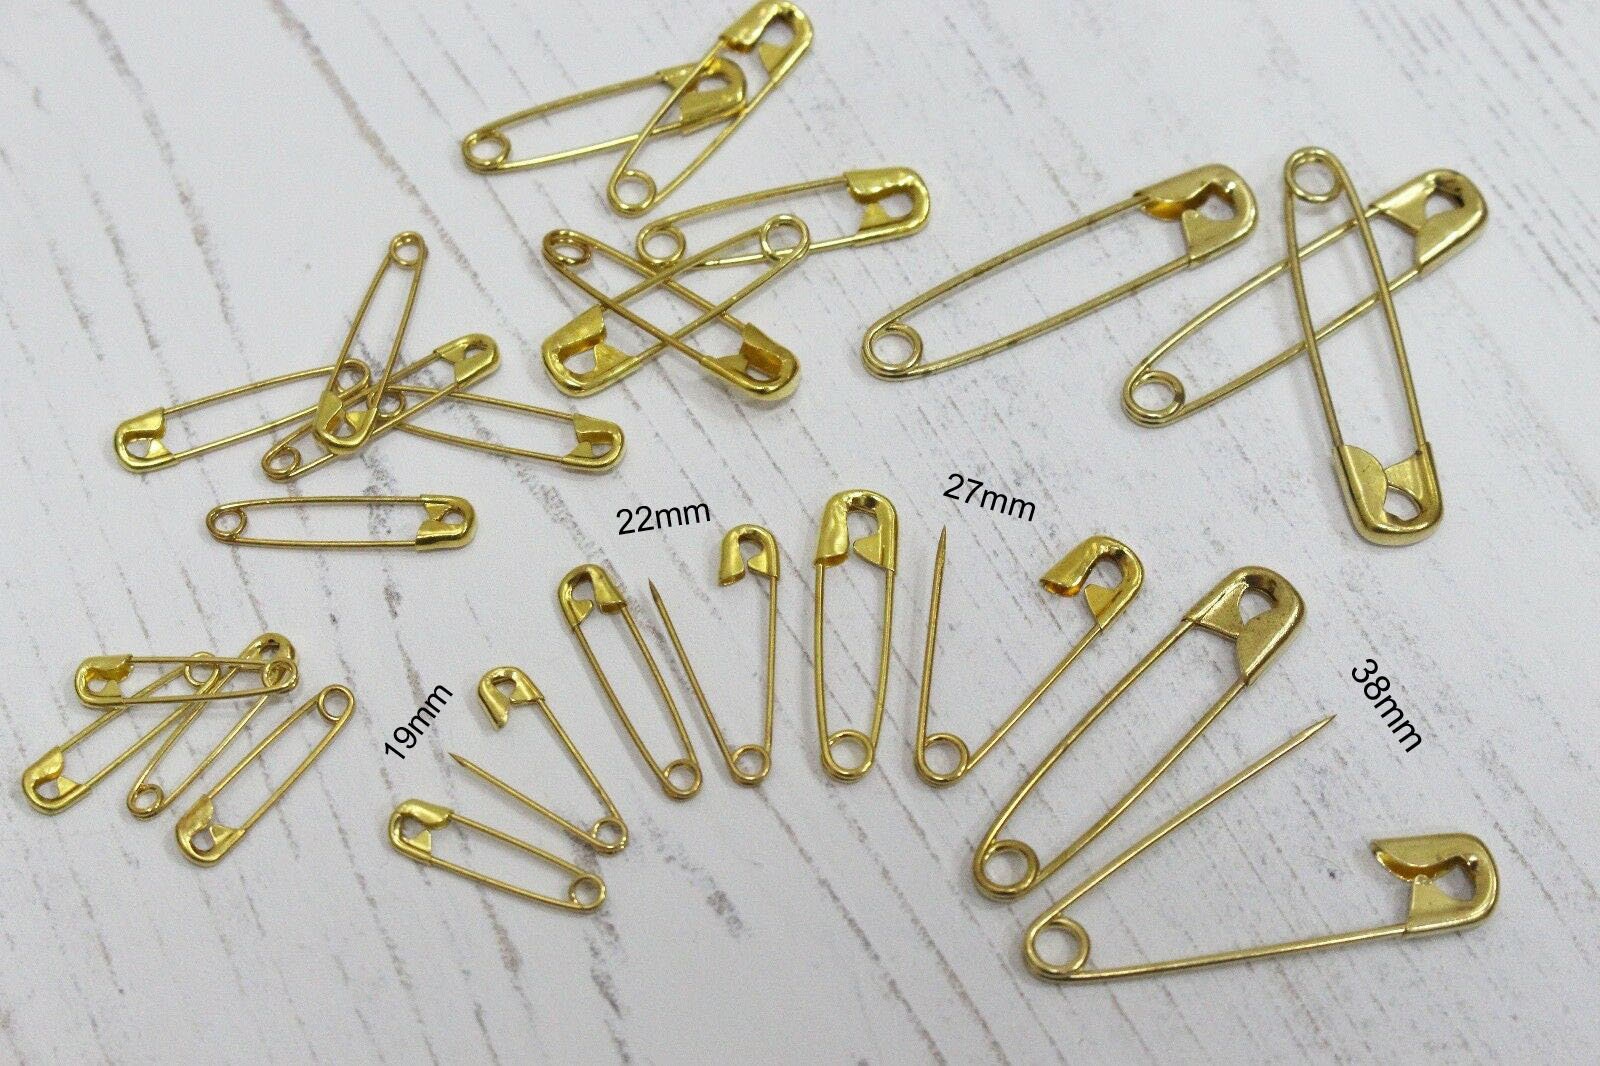 Extra Large Giant Jumbo Laundry Safety Pins 4 and 5 Inch 110mm and 128mm X2  Pins 